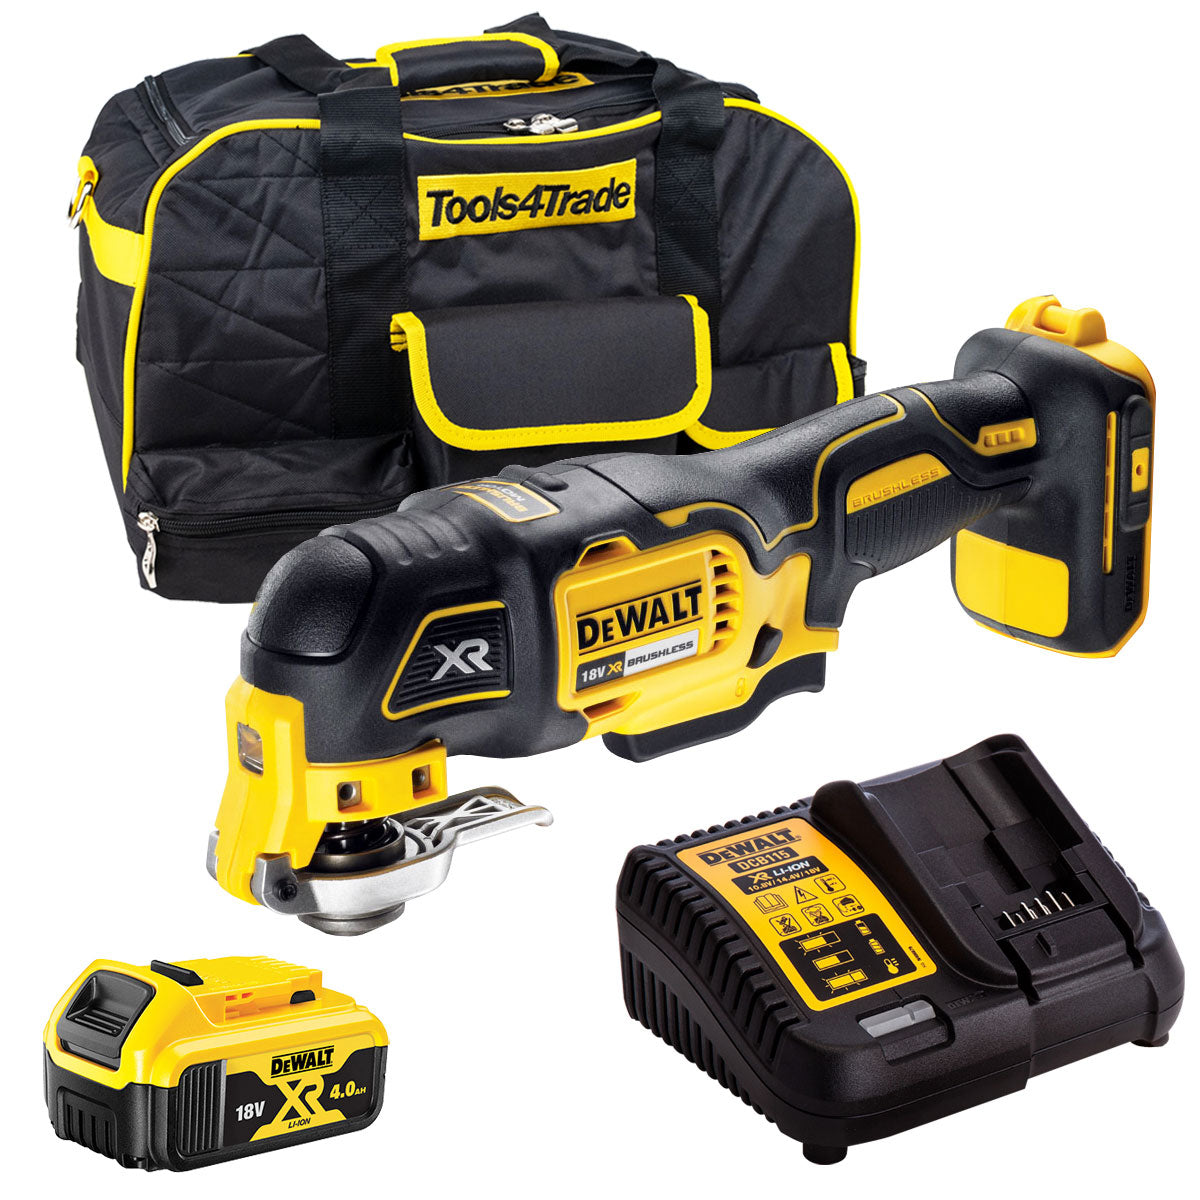 DeWalt DCS355N 18V Brushless Oscillating Multi-Tool Cutter with 1 x 4.0Ah Battery Charger & Bag